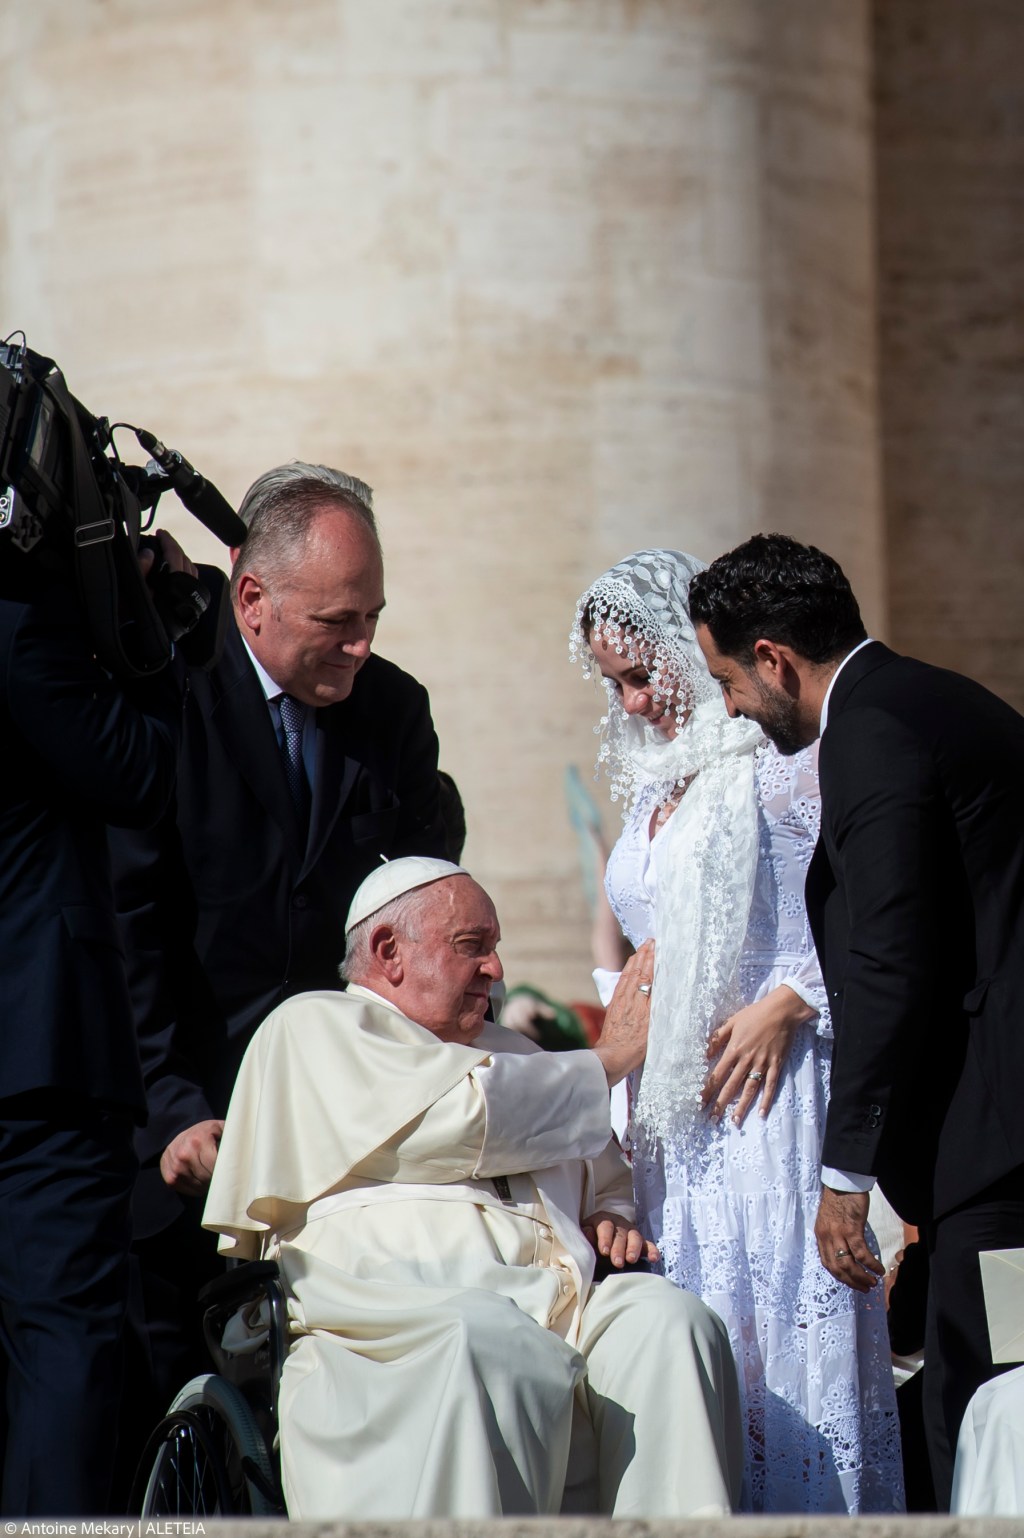 Pope Francis blesses the pregnant belly of a newlywed bride.